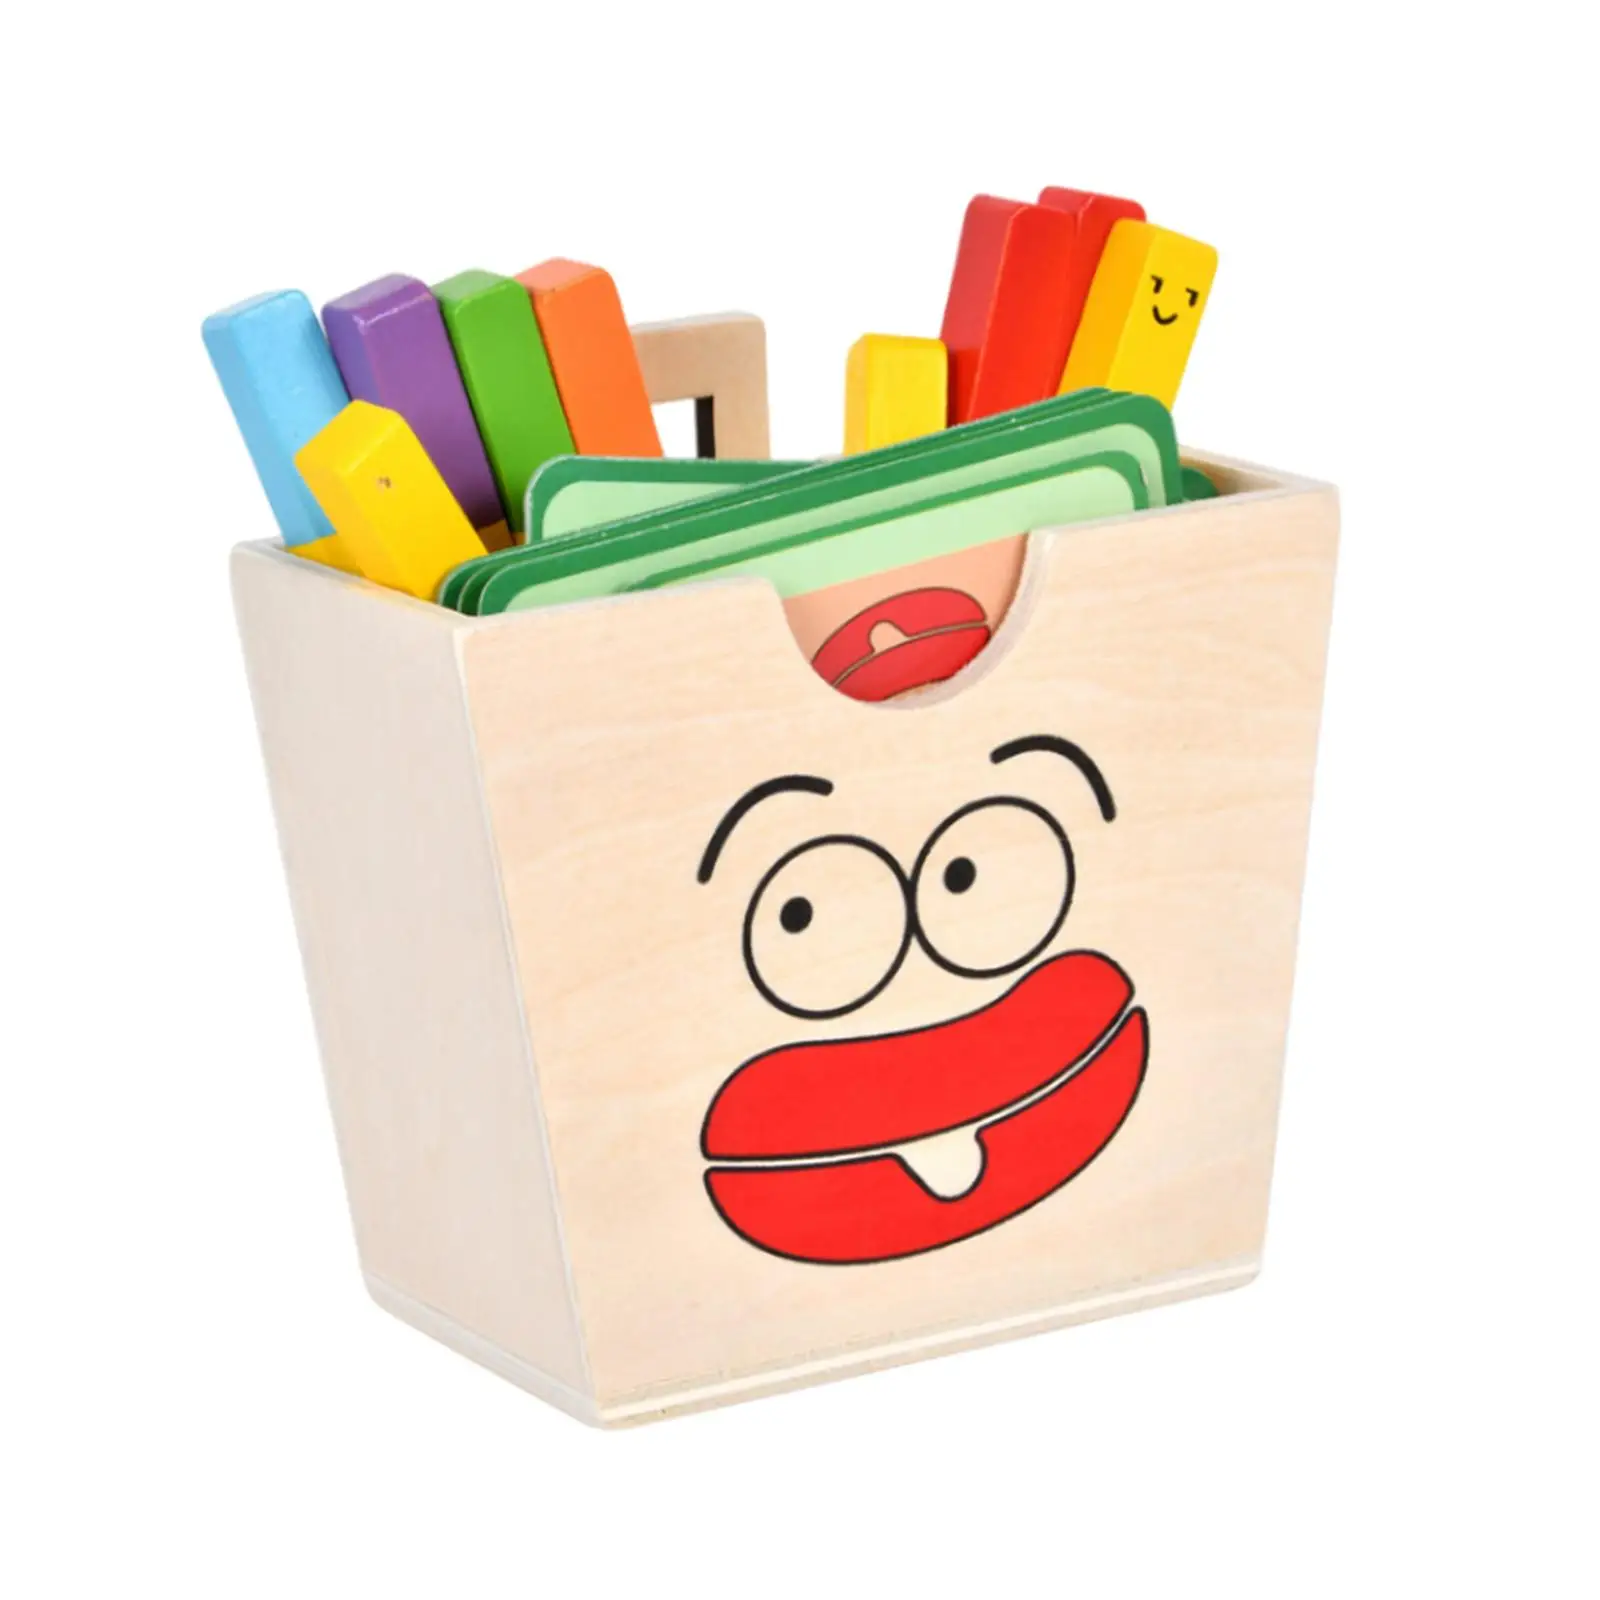 Simulation French Fries Color Matching Game Coordination Educational Color Sorting Matching Box for Activity Learning Preschool